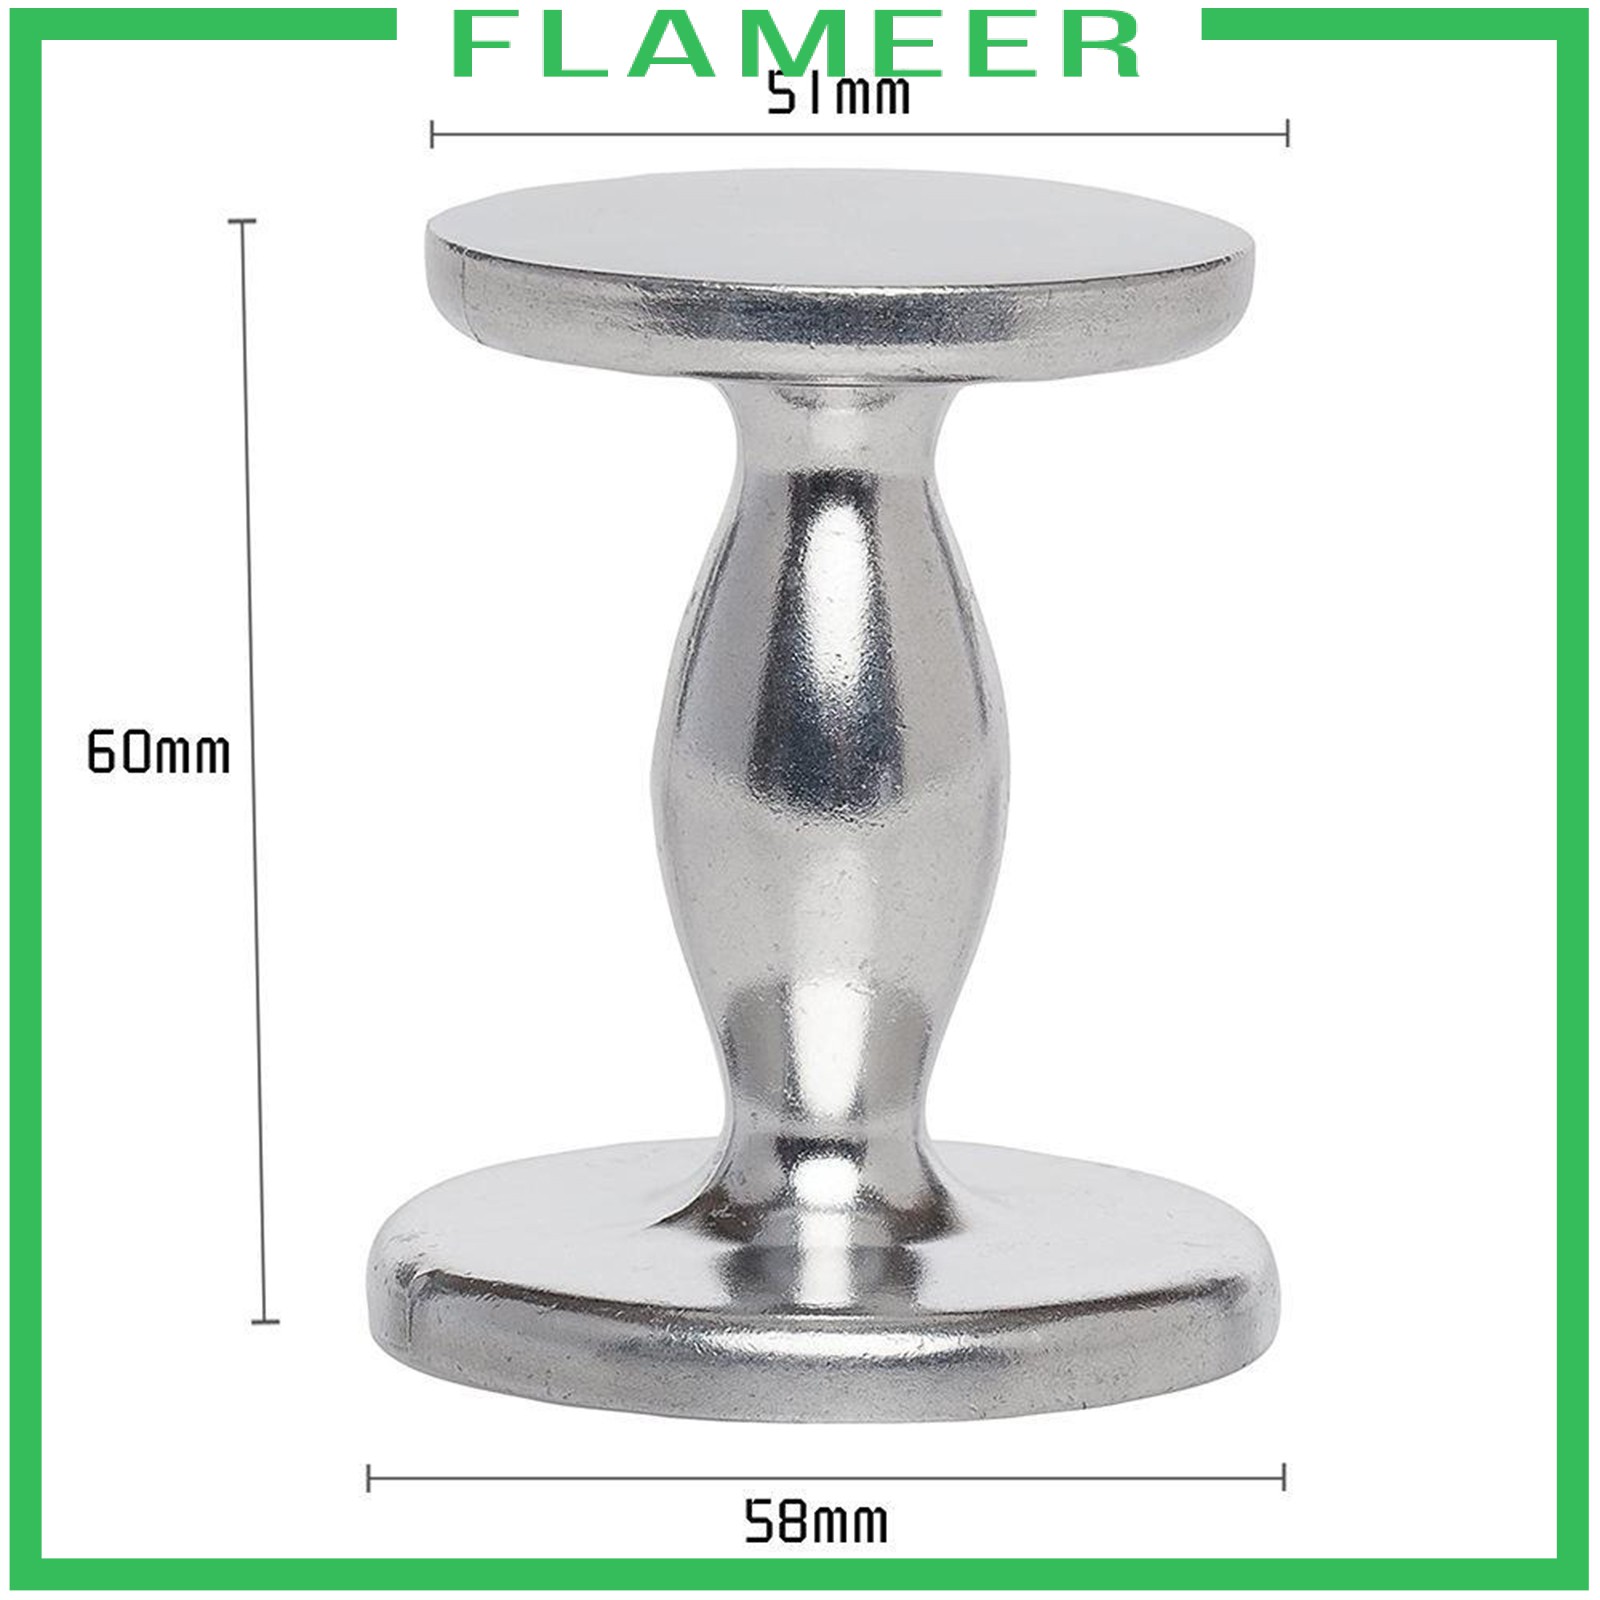 [FLAMEER] Stainless Steel Dual Sided Espresso Tamper 51mm / 58mm